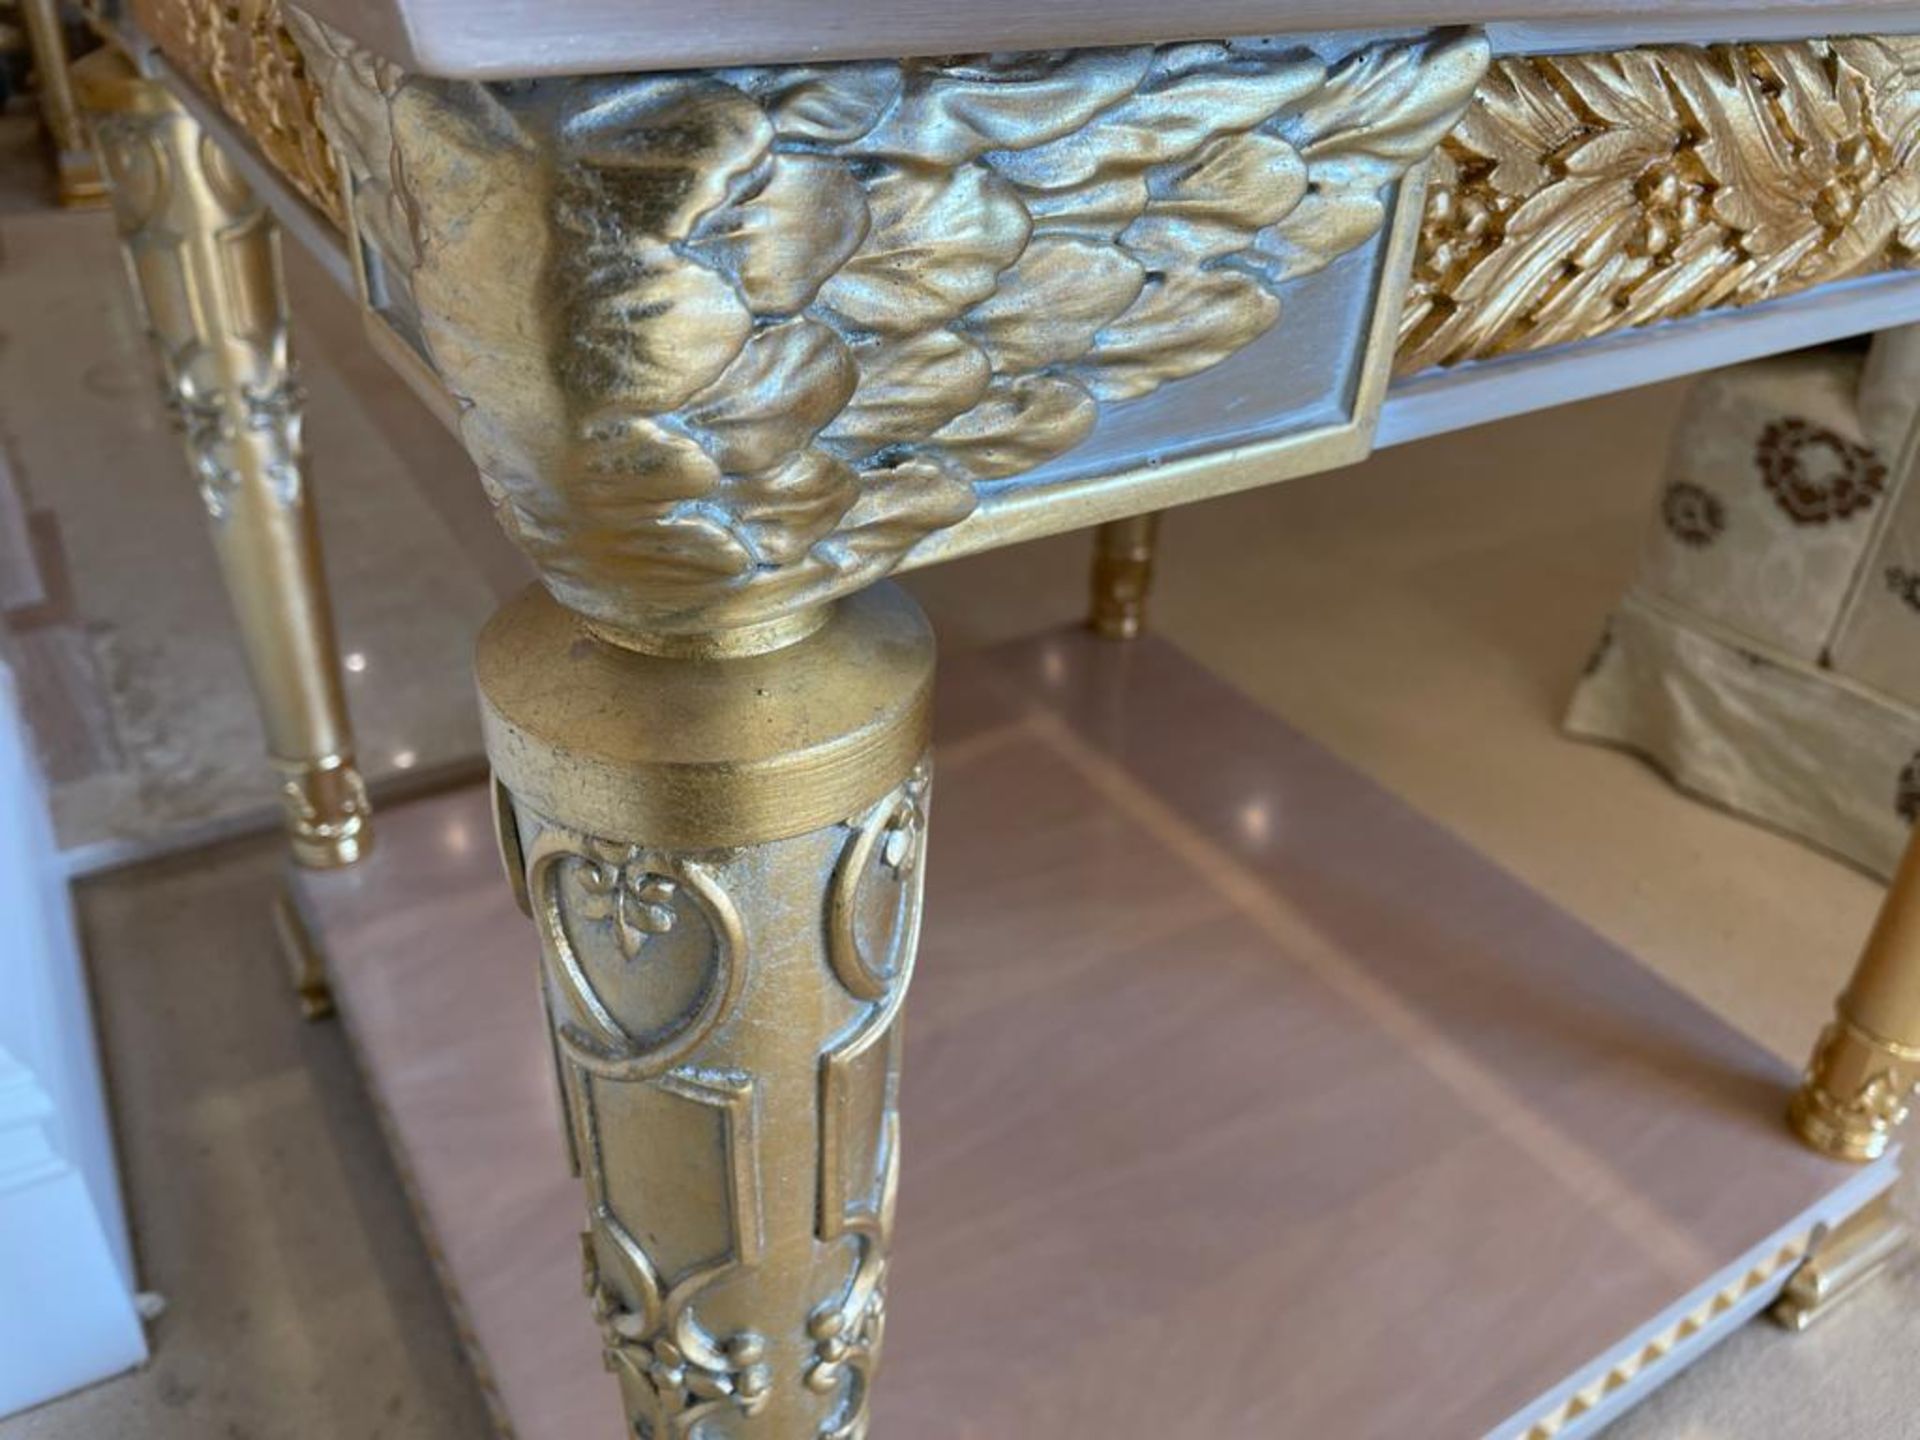 2 x Hand Carved Ornate Side Tables Complimented With Birchwood Veneer, Golden Pillar Legs, Carved - Image 3 of 13